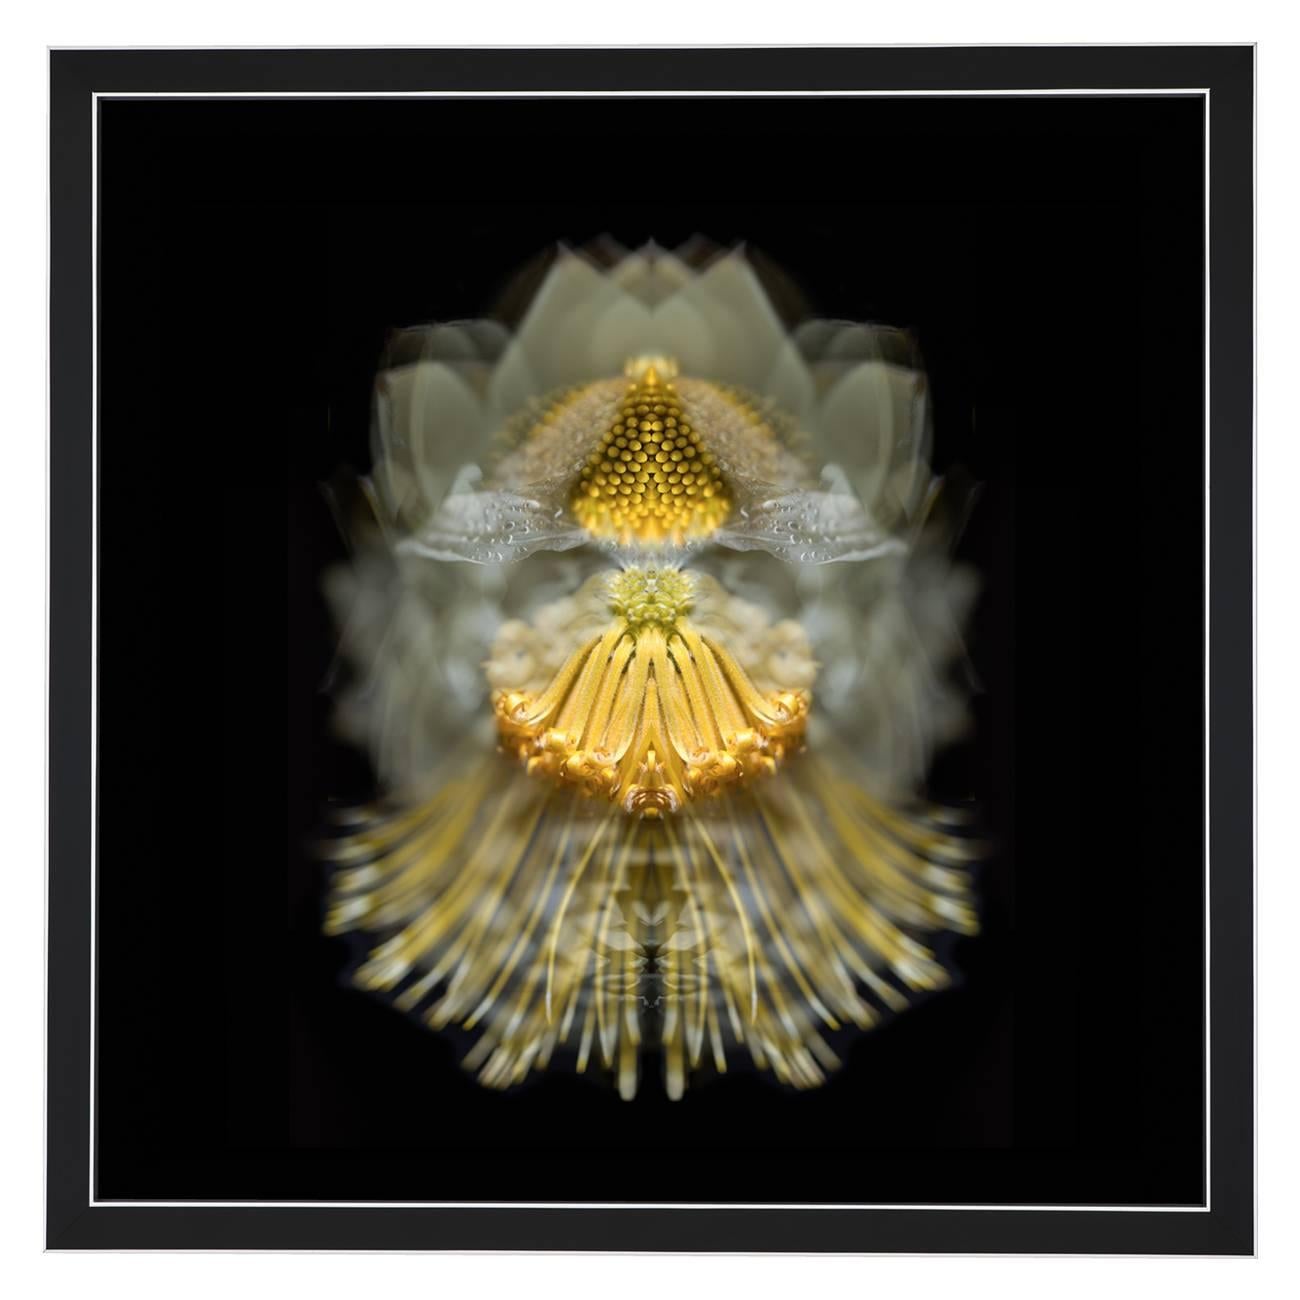 Composition: 
Leucadendron eucalyptifolium, Leucospermum Reflexum

Limited edition. Each image is uniquely printed directly to 5mm acrylic glass using UV cured pigment inks giving each photograph real depth and clarity. Every picture is beautifully